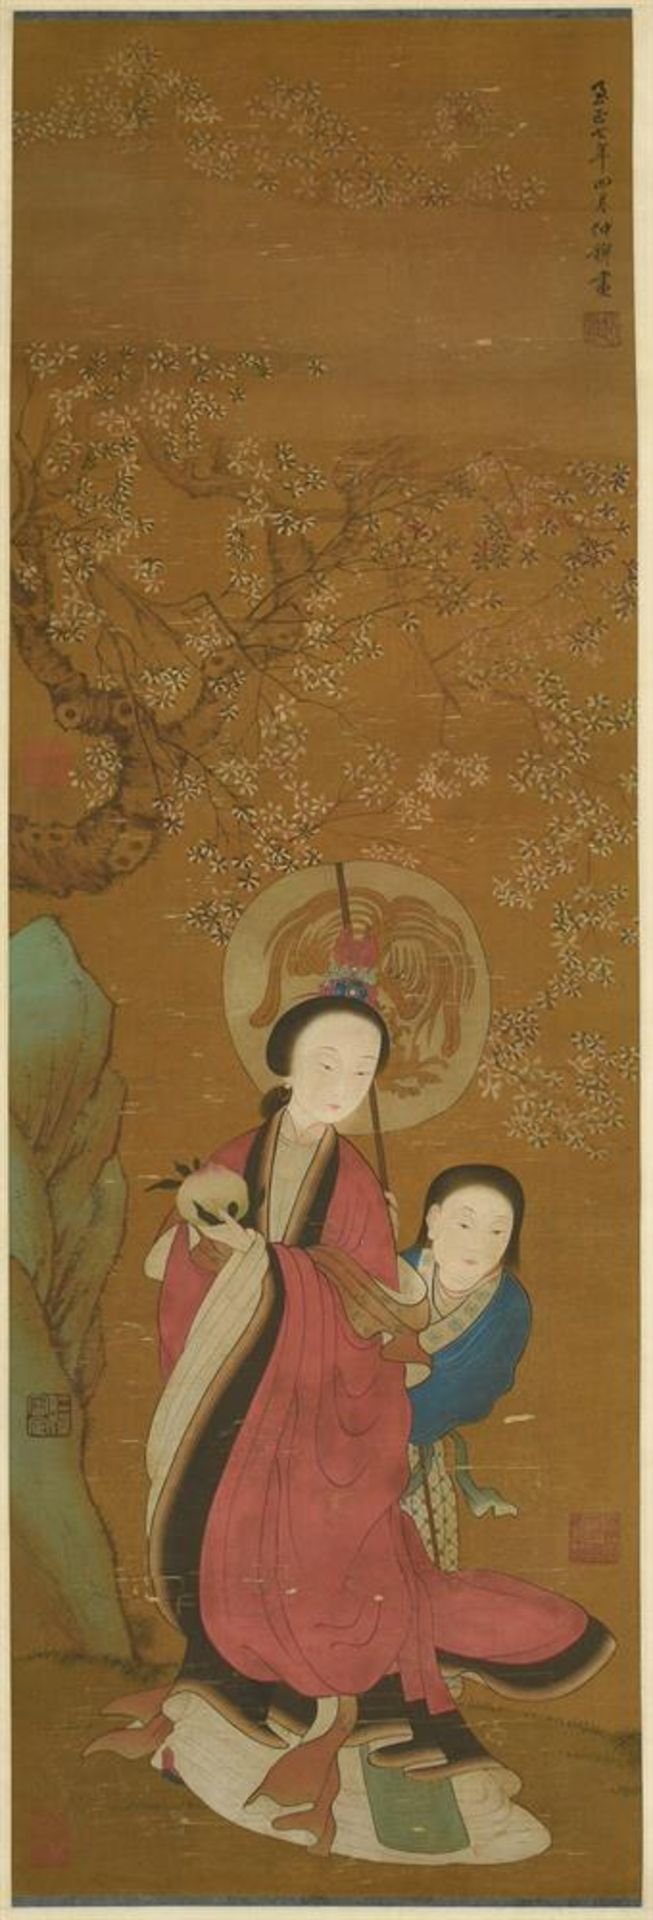 In the style of Zhao Zhongmu but late 19th century